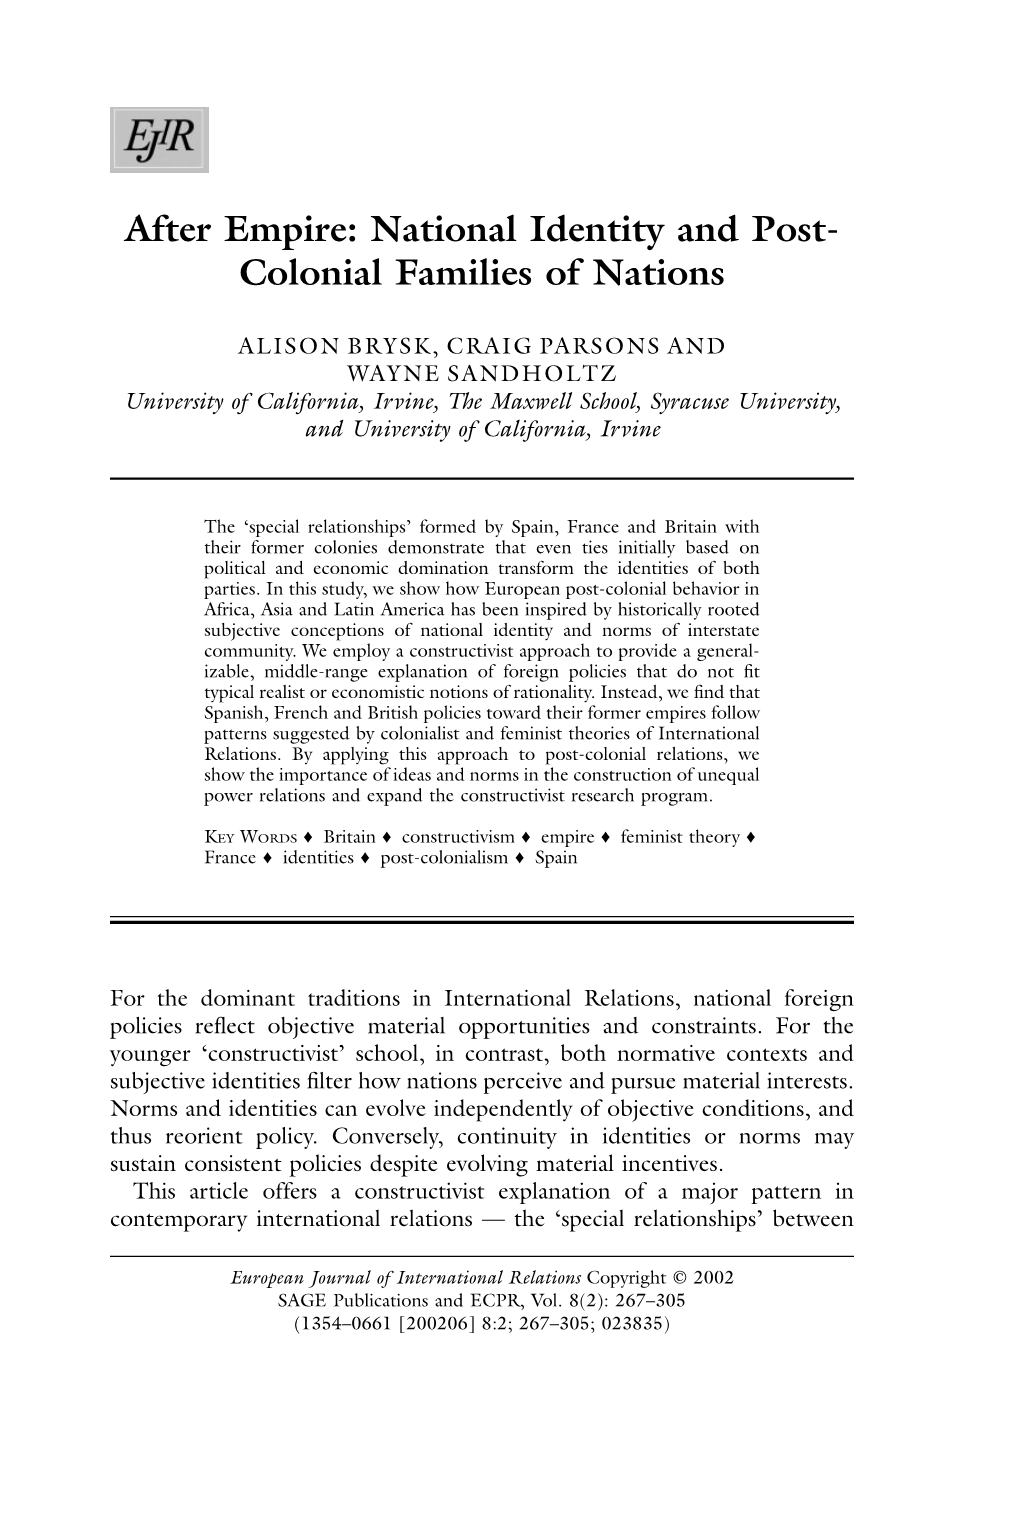 After Empire: National Identity and Post-Colonial Families of Nations